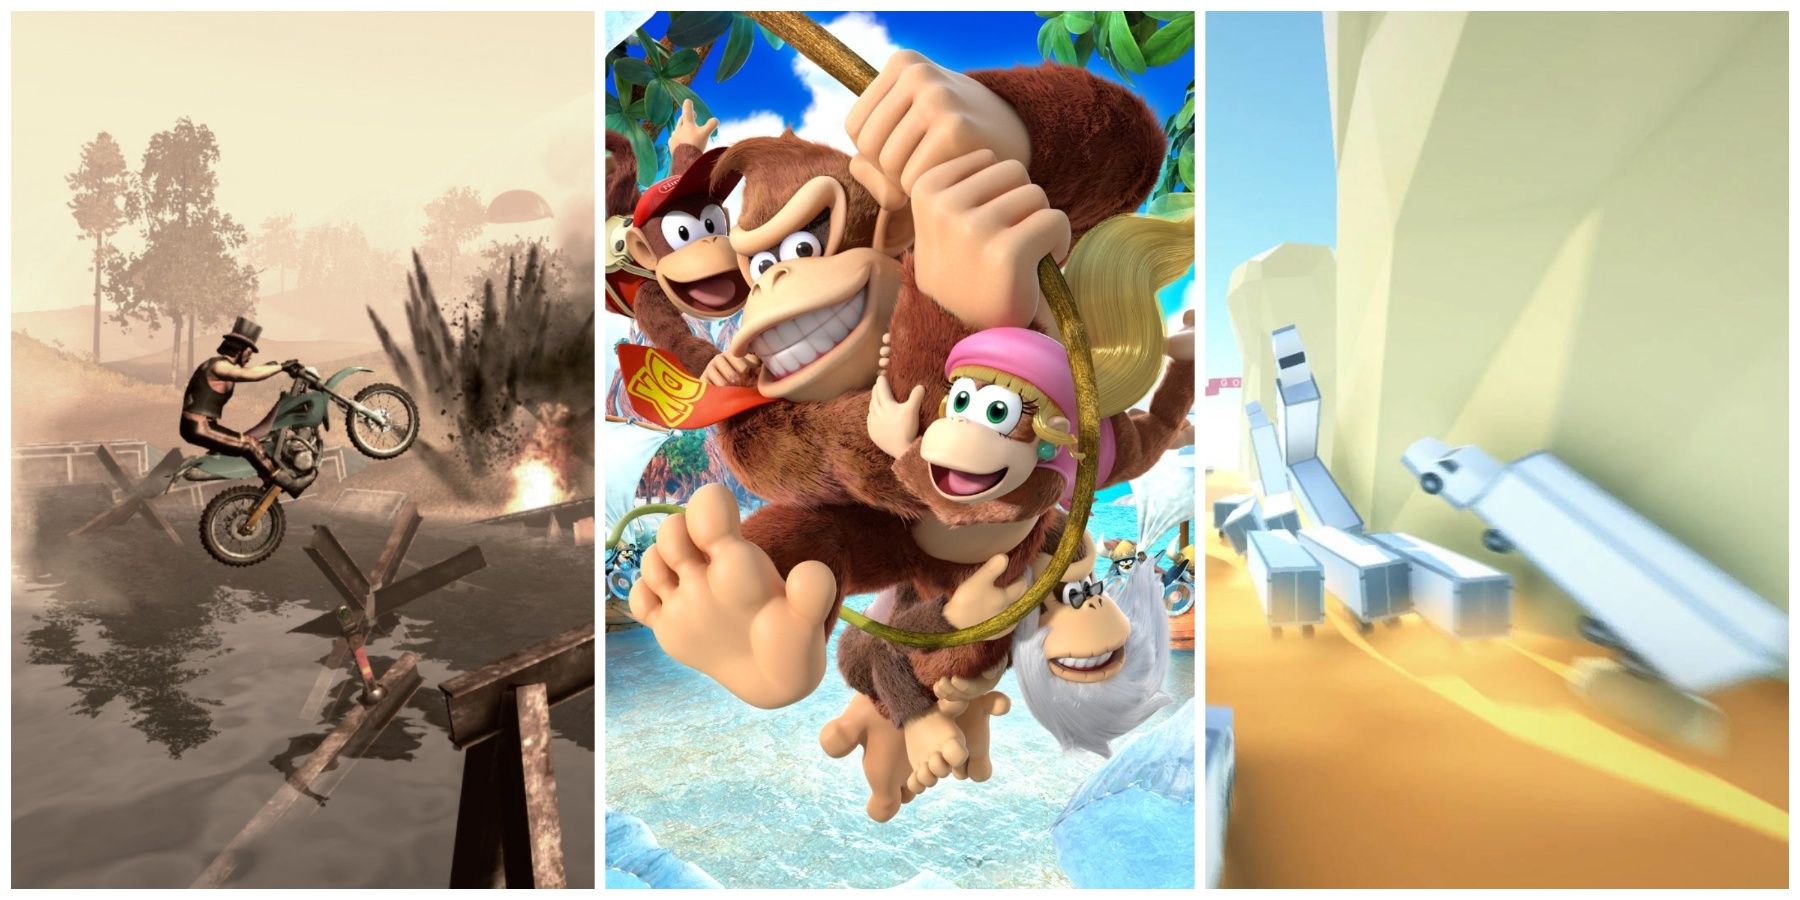 Featured image of Time Trial games Trials Evolution, Donkey Kong Country: Tropical Freeze, and Clustertruck